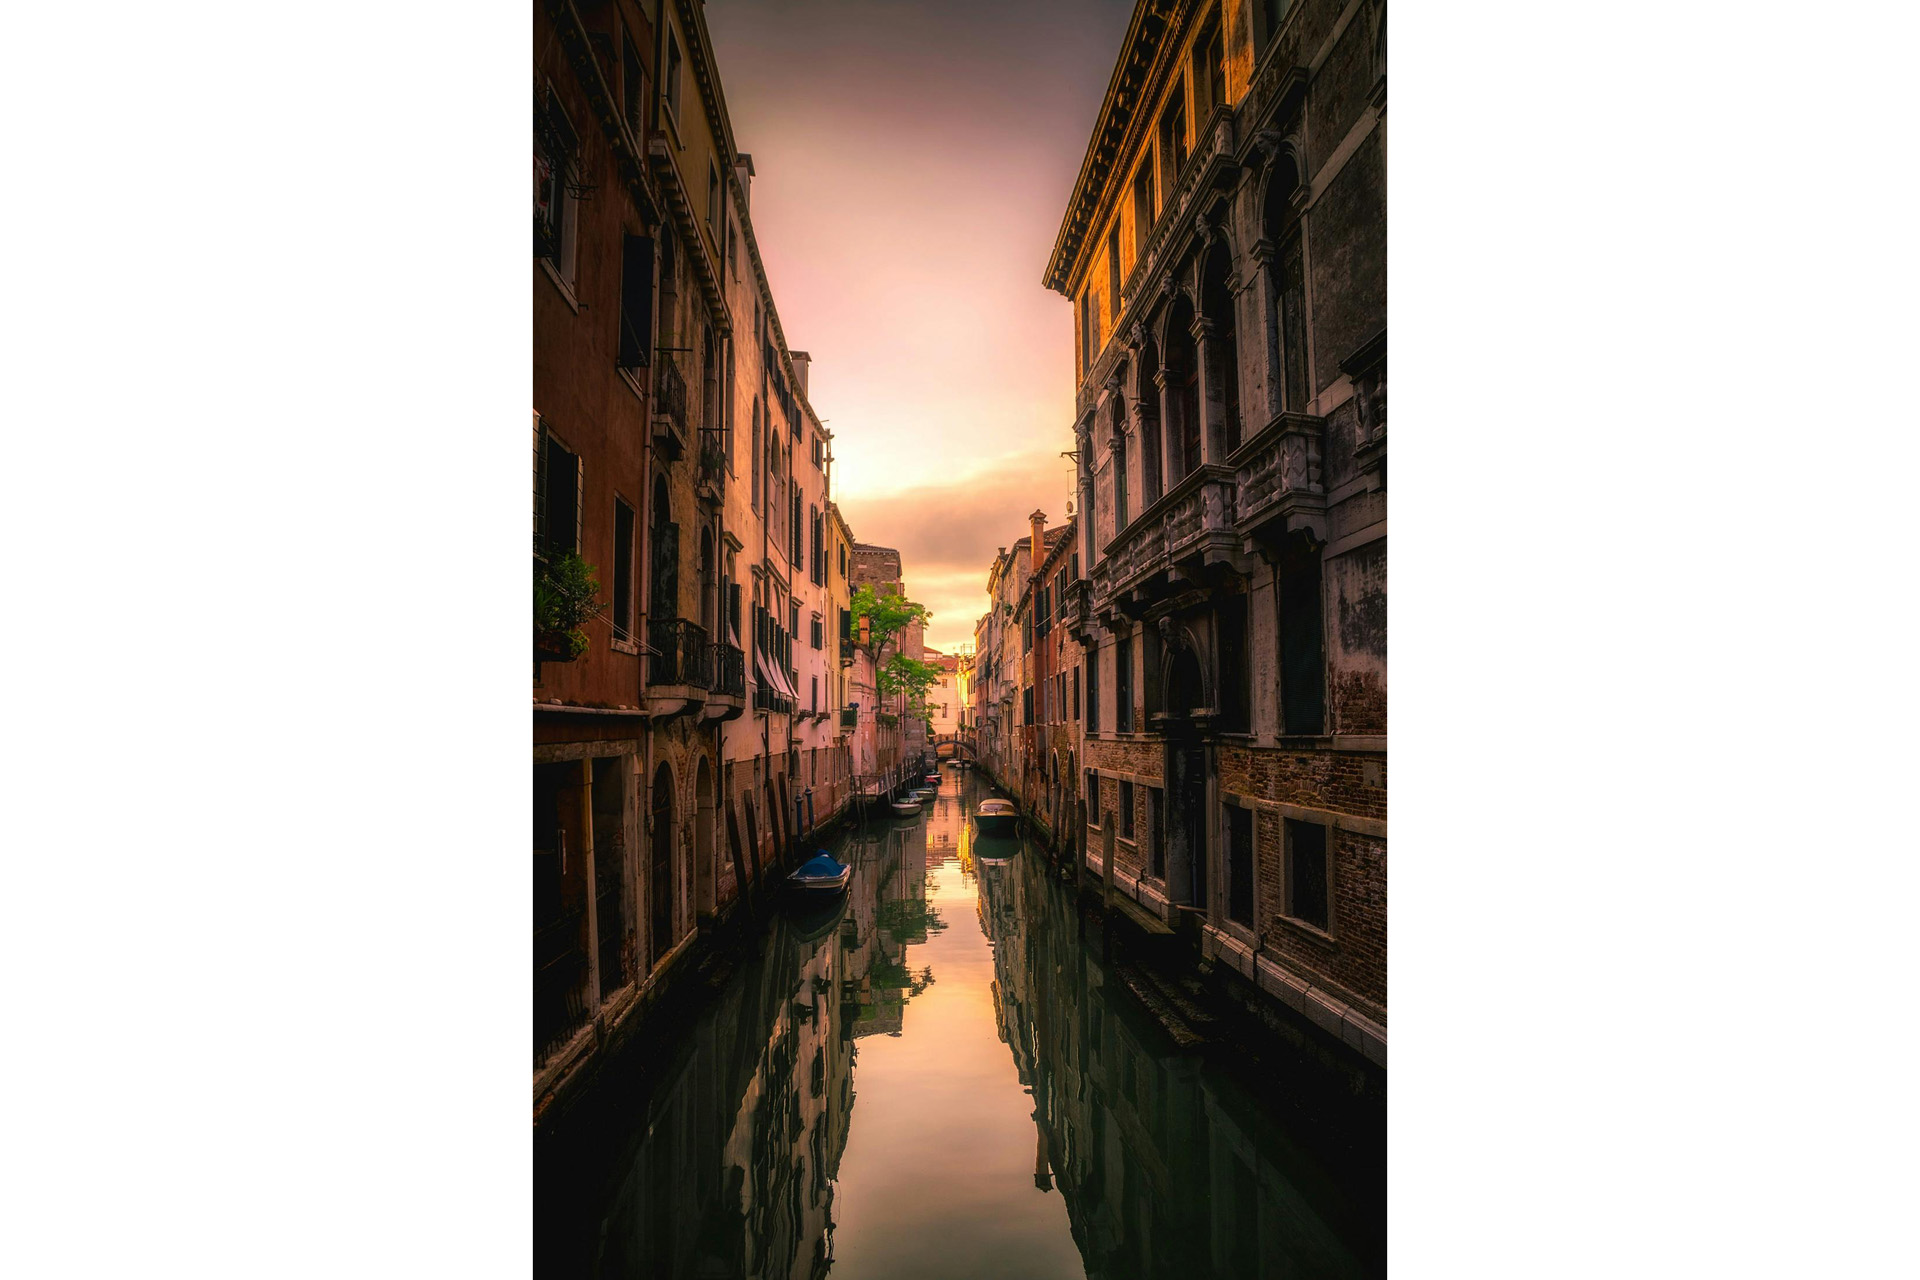 Travel to Venice in the off-season